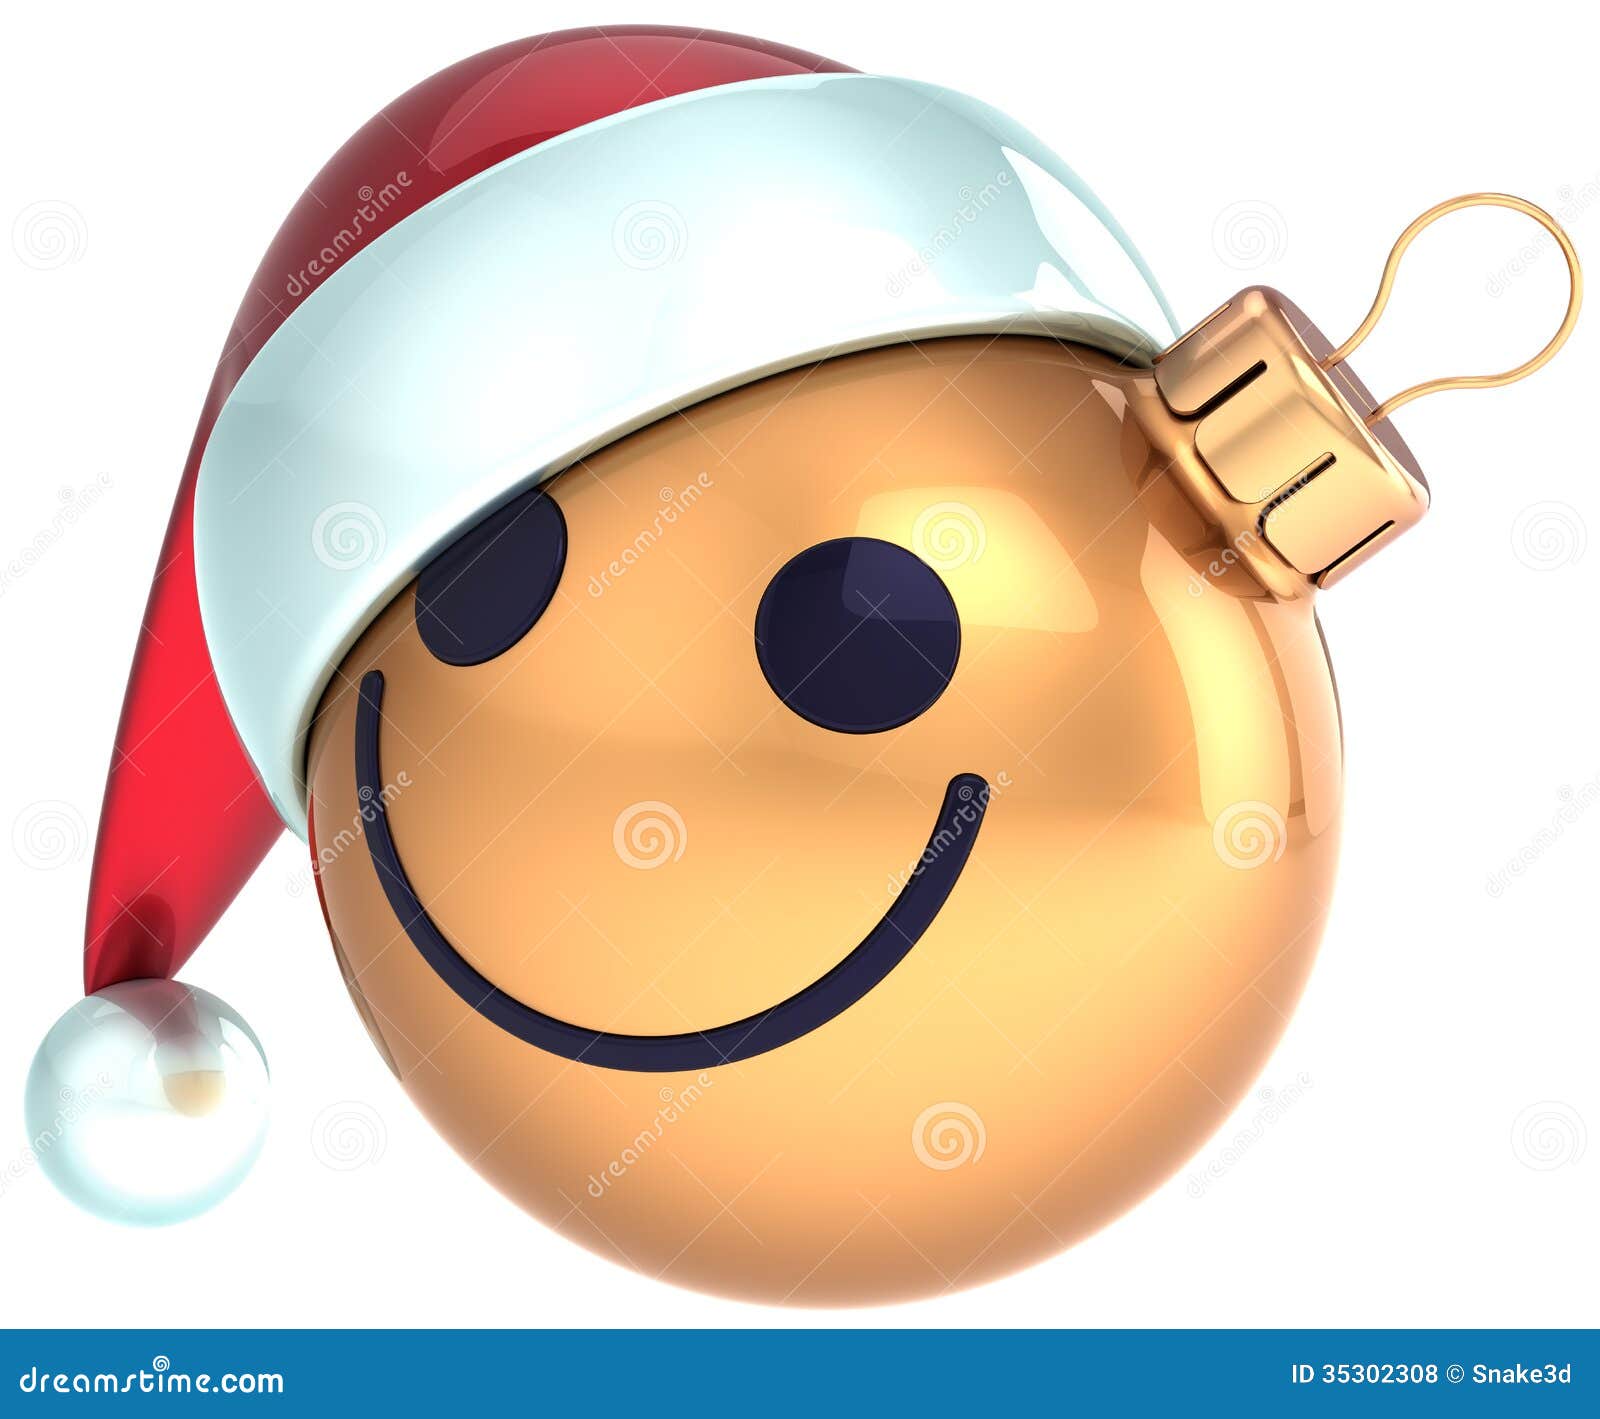 happy new year smiley face clip art - photo #34